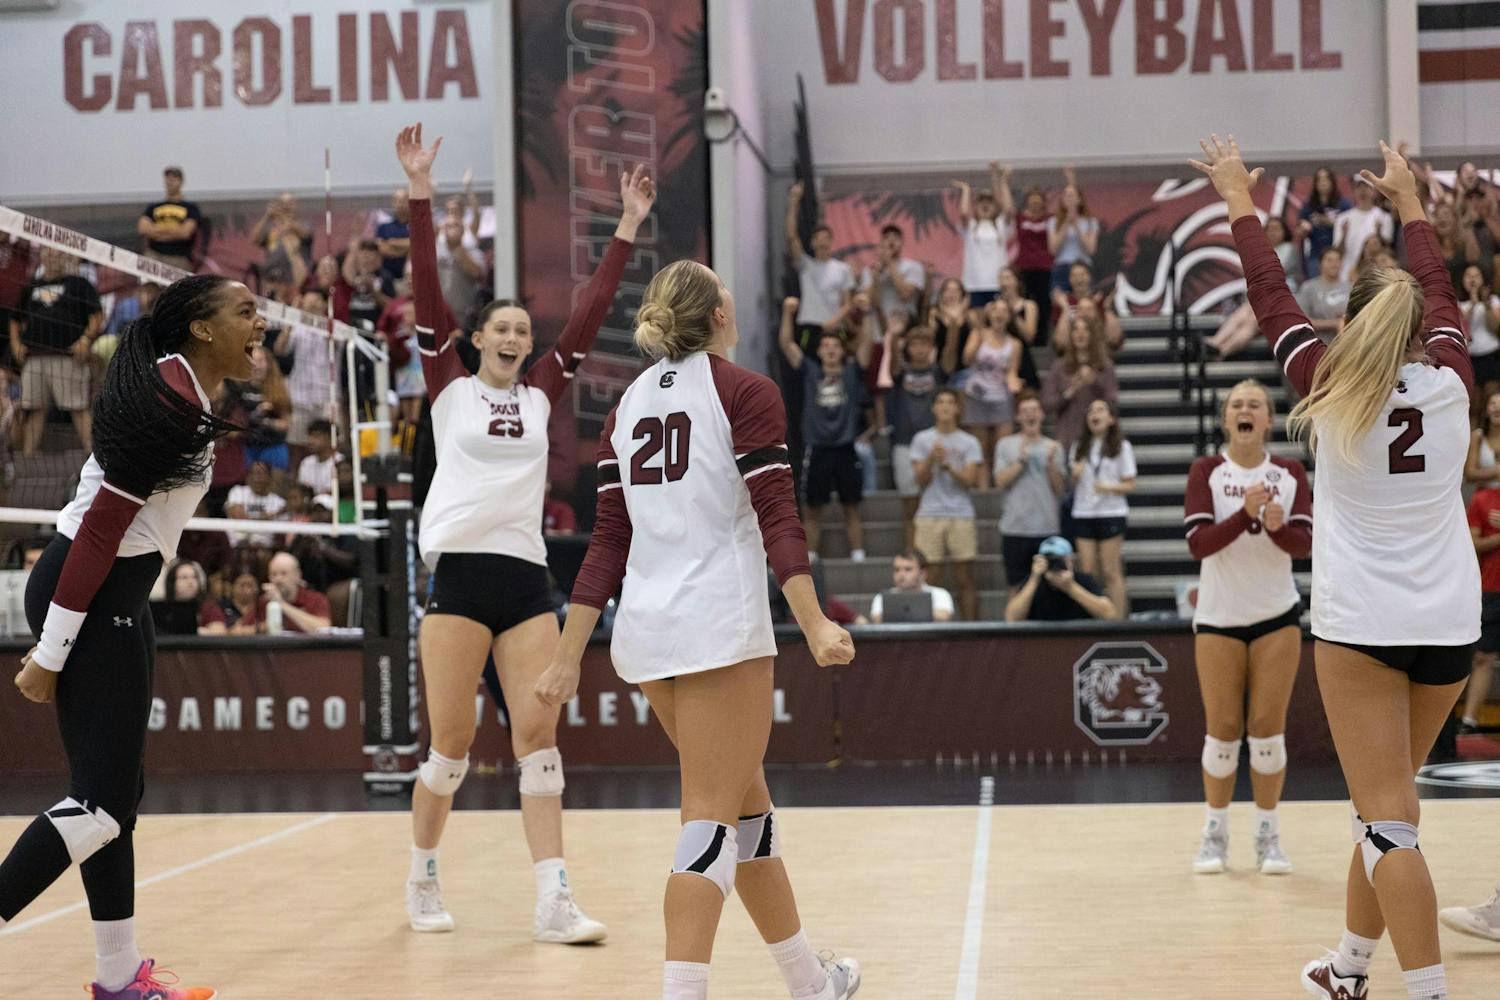 The 鶹С򽴫ý women's volleyball team celebrates earning a point during its match against Towson University on Aug. 26. The Gamecocks defeated the Tigers 3-1 after losing 3-0 earlier in the weekend.